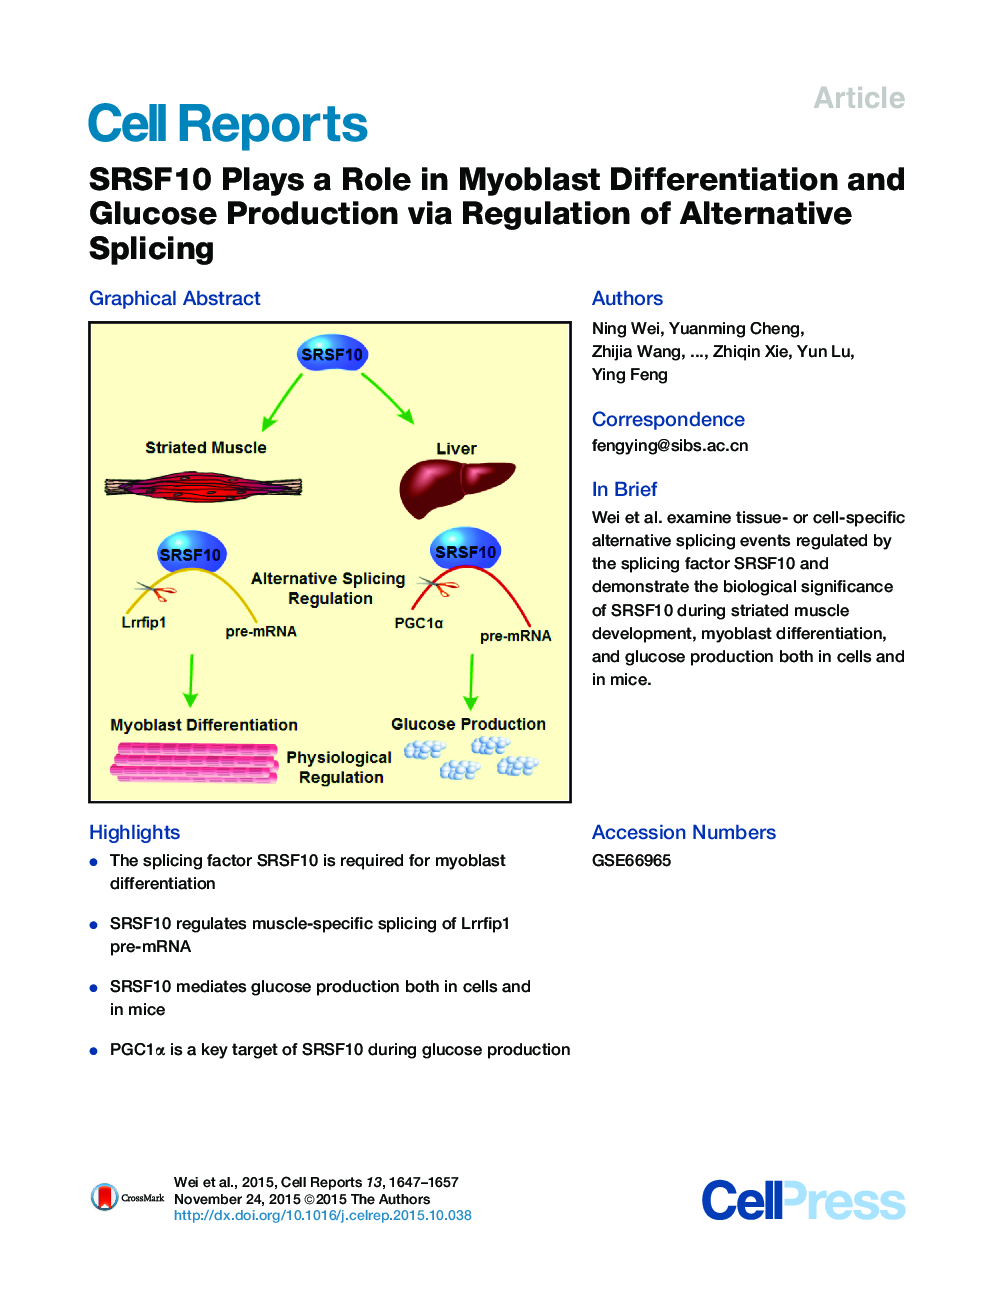 SRSF10 Plays a Role in Myoblast Differentiation and Glucose Production via Regulation of Alternative Splicing 